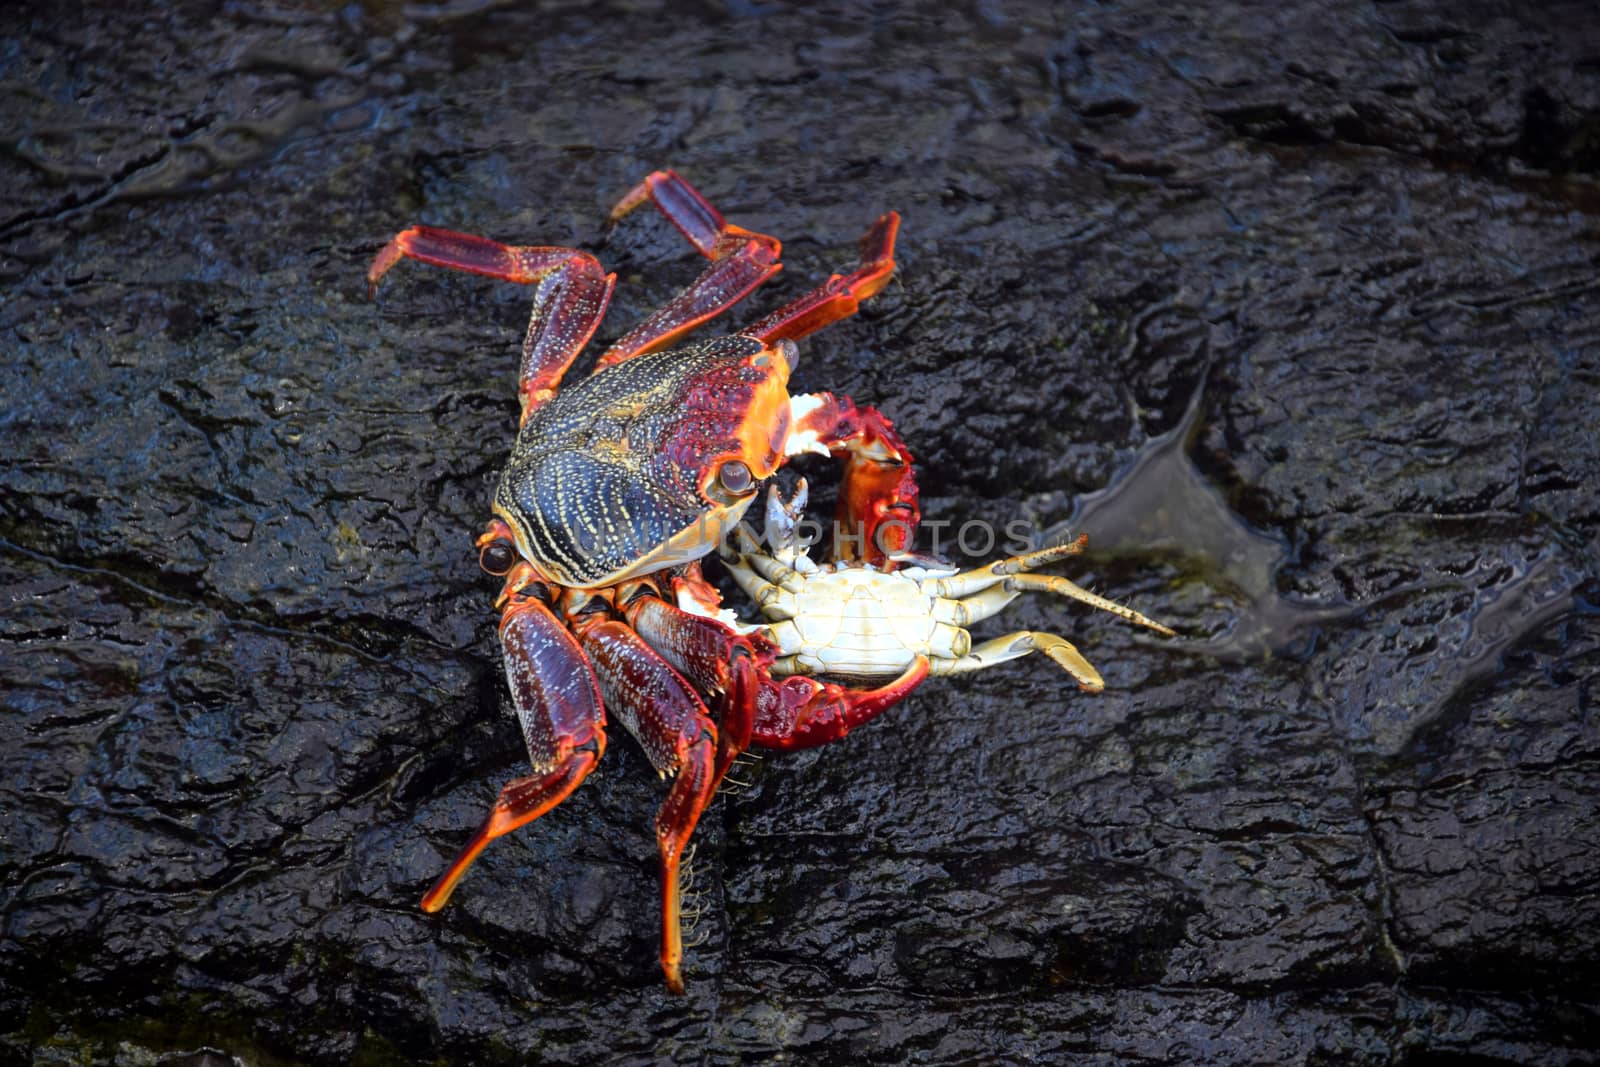 Crab eating another crab by eldervs